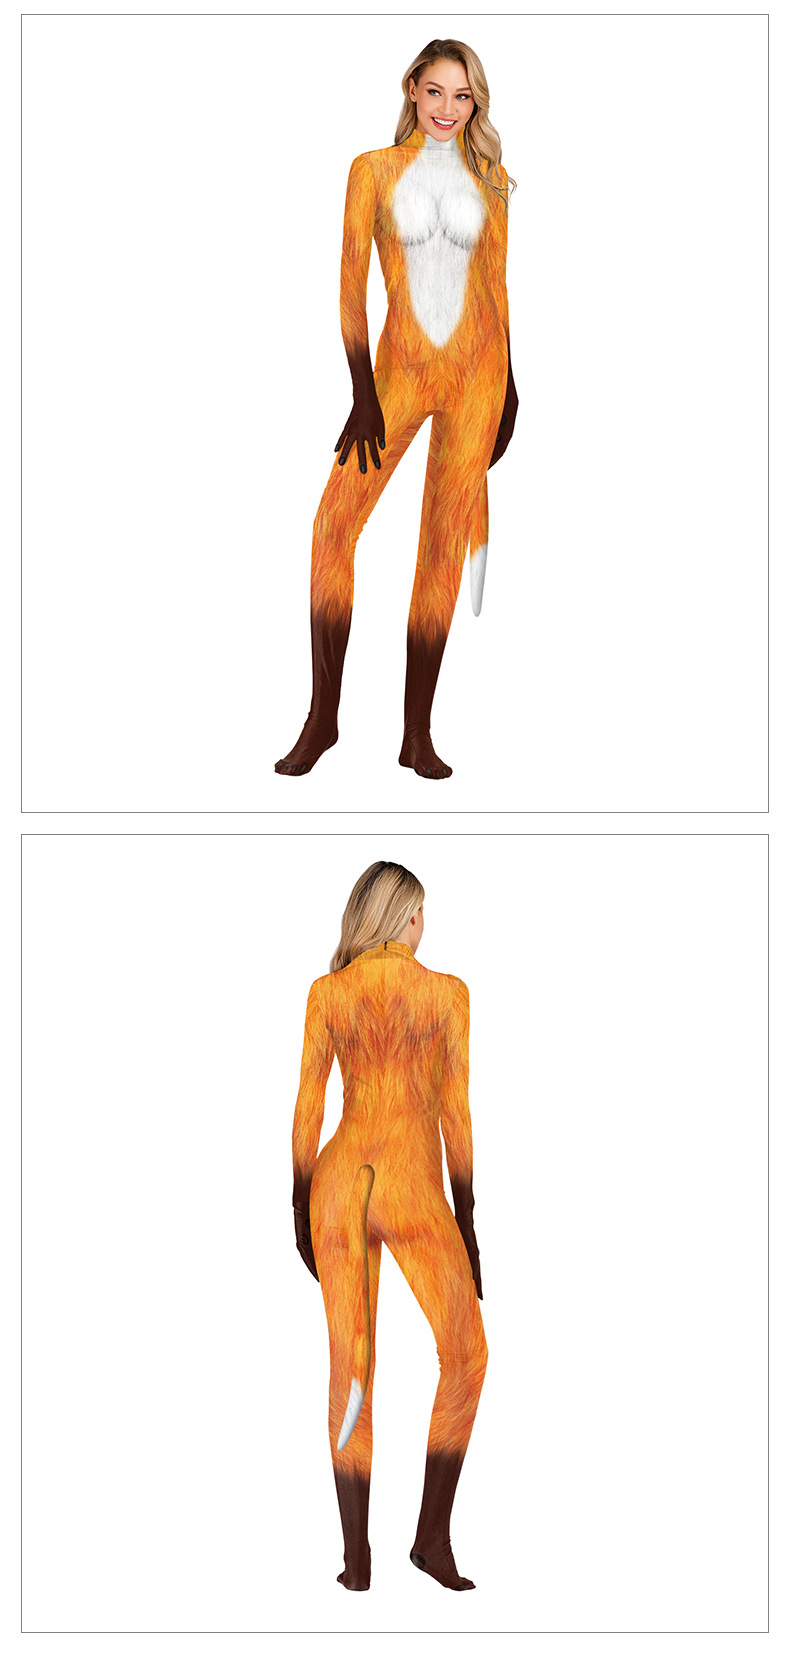 women's sexy fox animal 3d print catsuit with tail for ladies - product model show -front and back